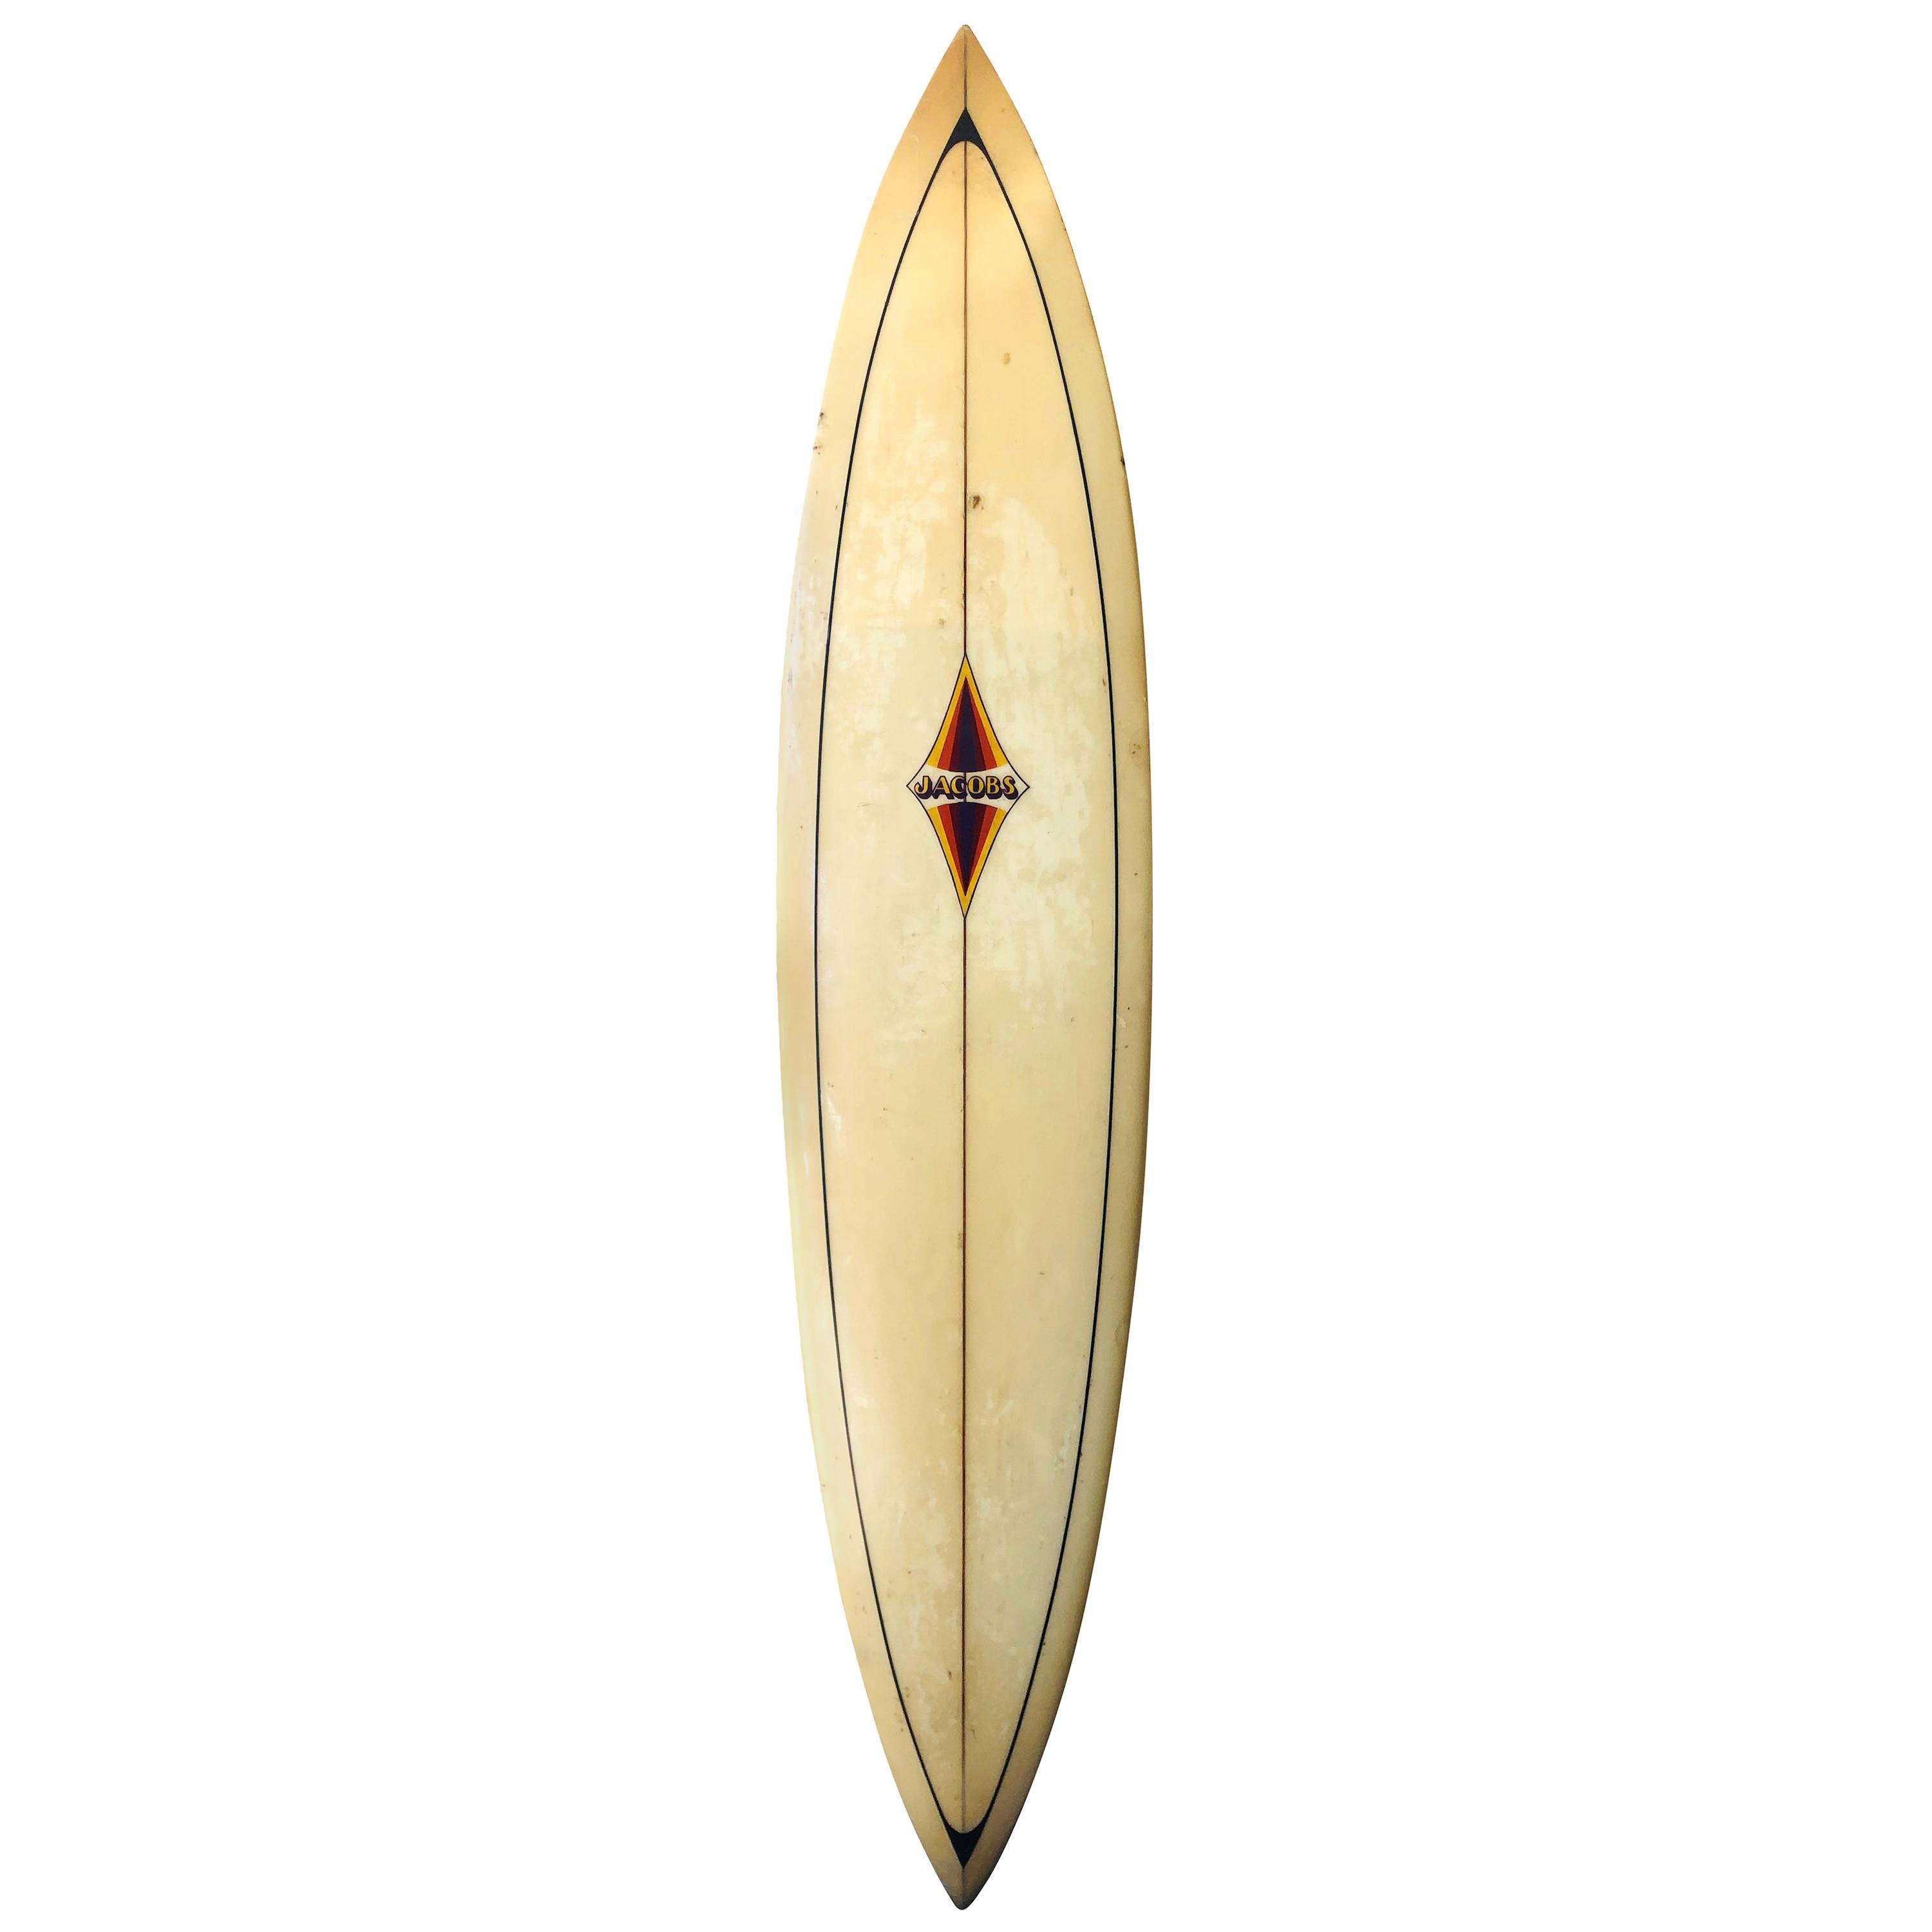 1960s Vintage Jacobs Pintail Surfboard